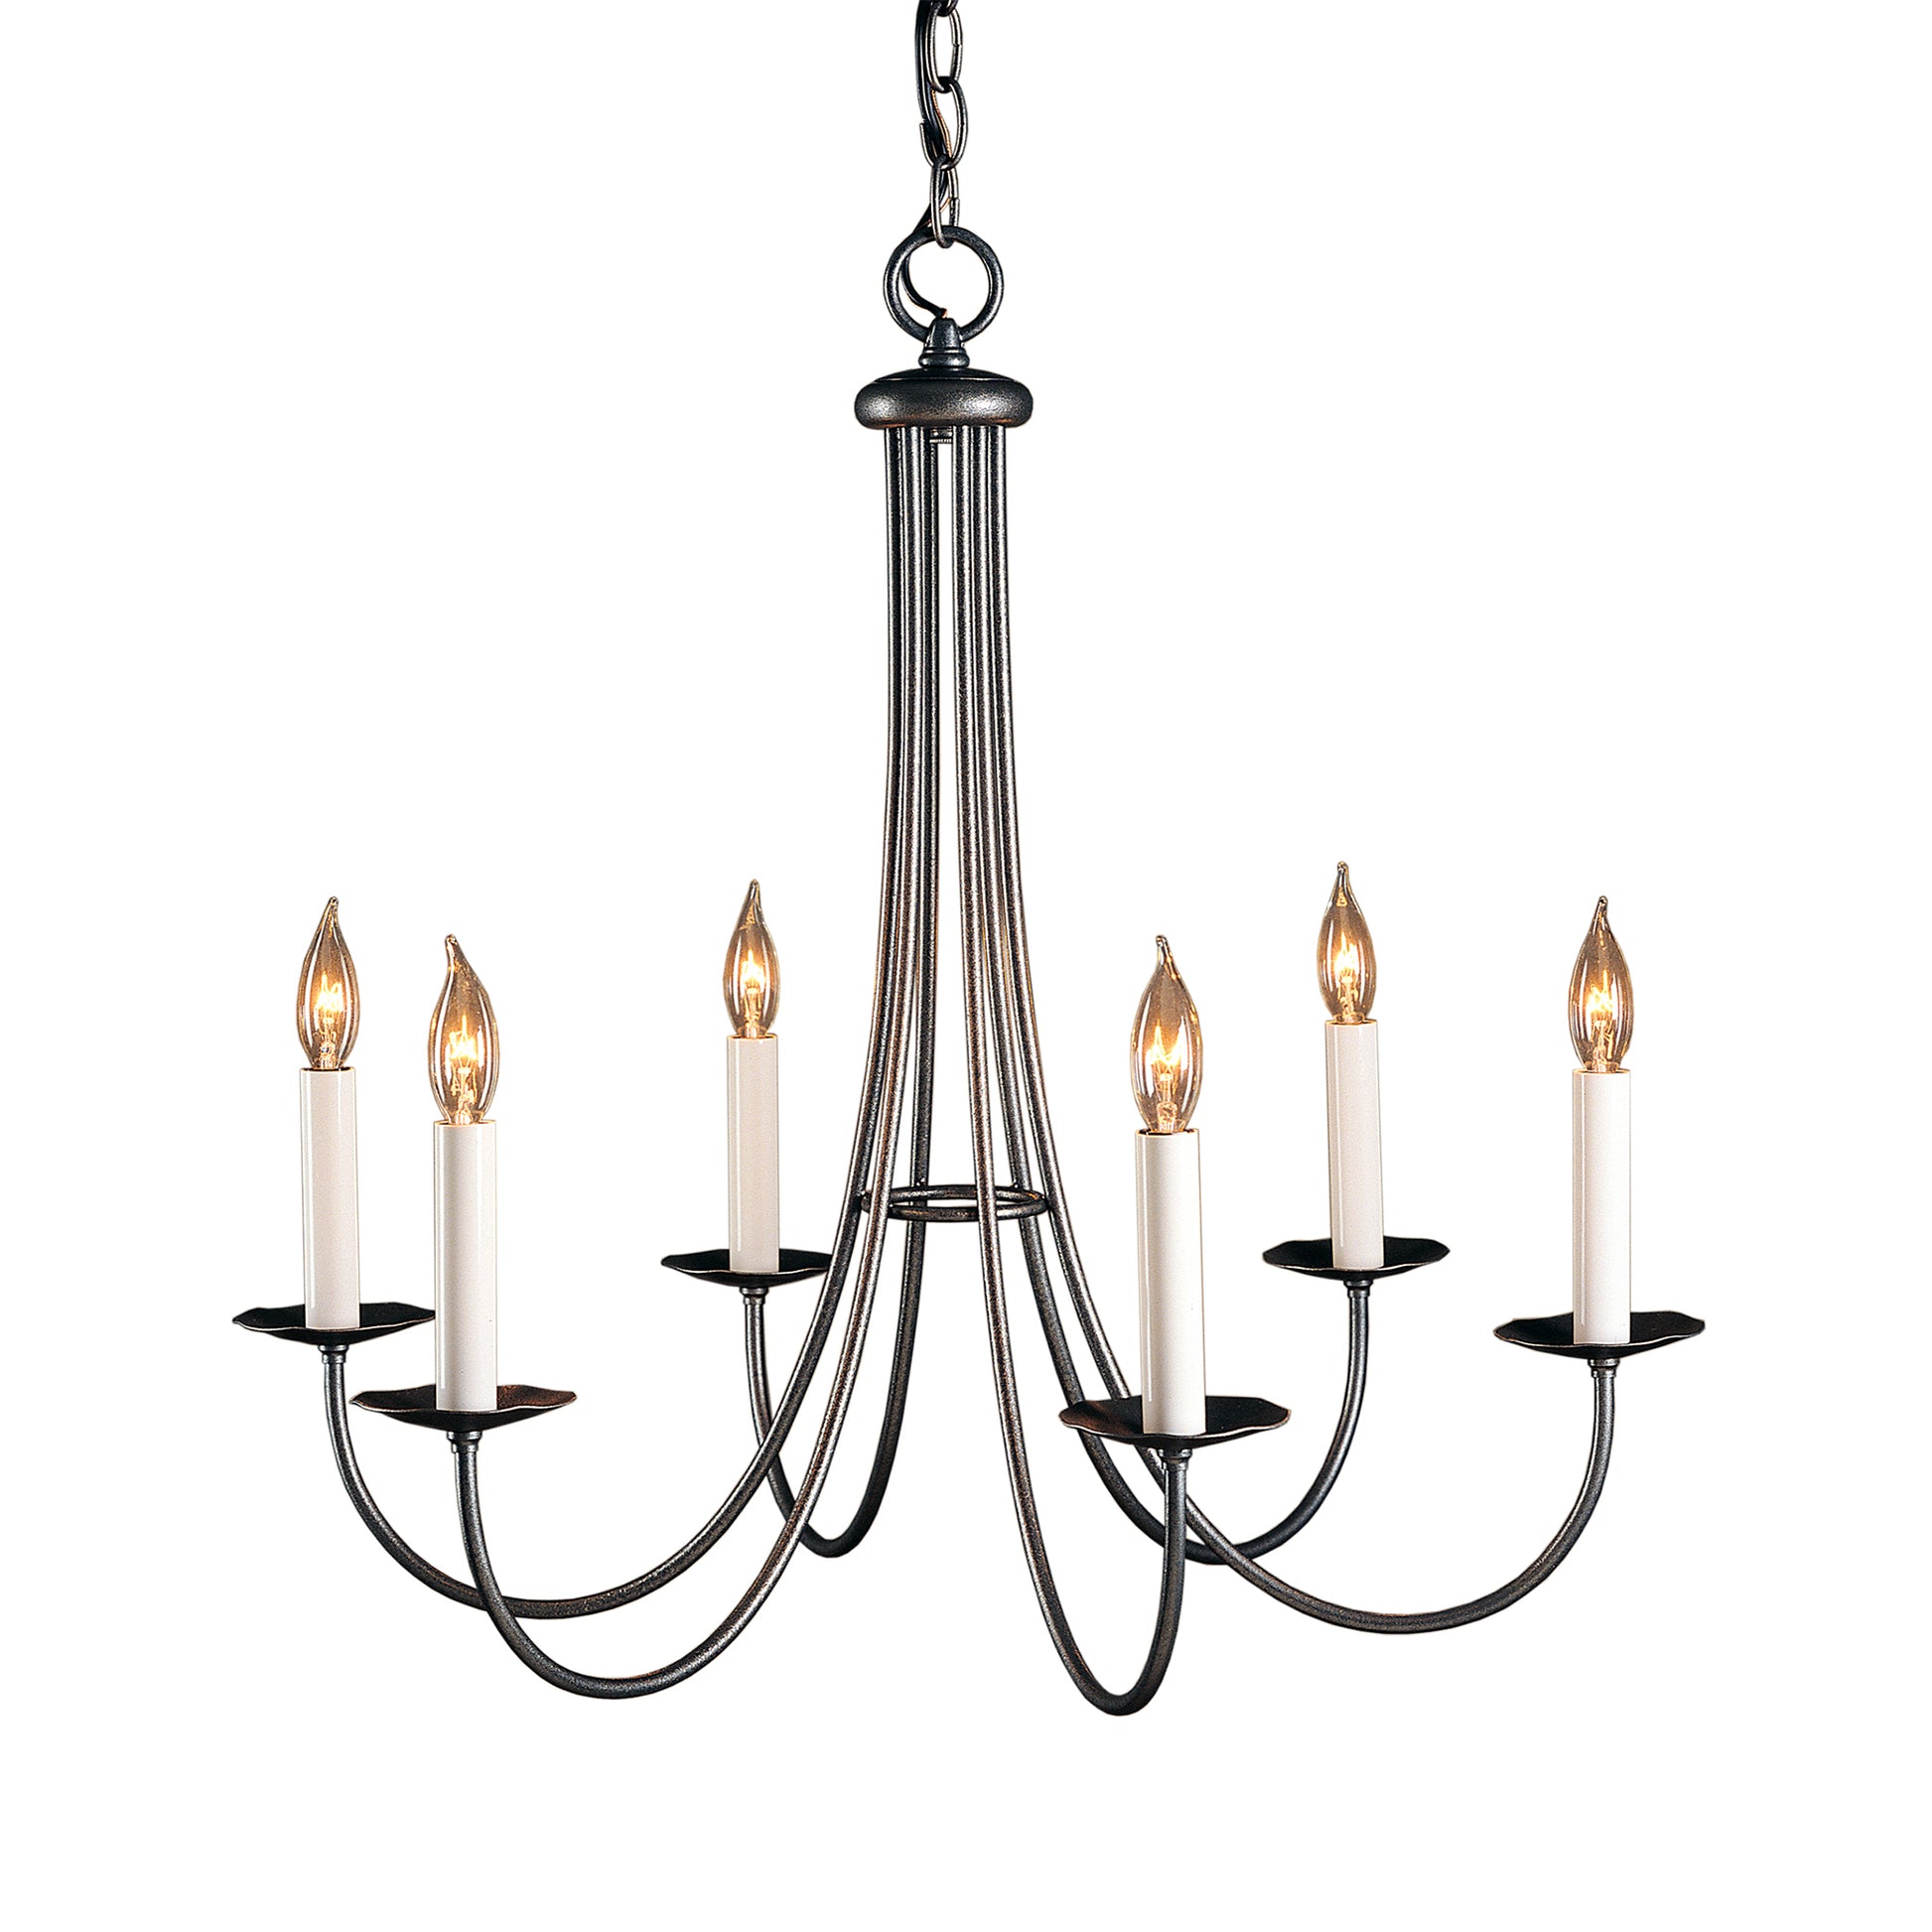 A Simple Sweep 6-Arm Chandelier by Hubbardton Forge, featuring a stunning iron working design, adorned with six candles.